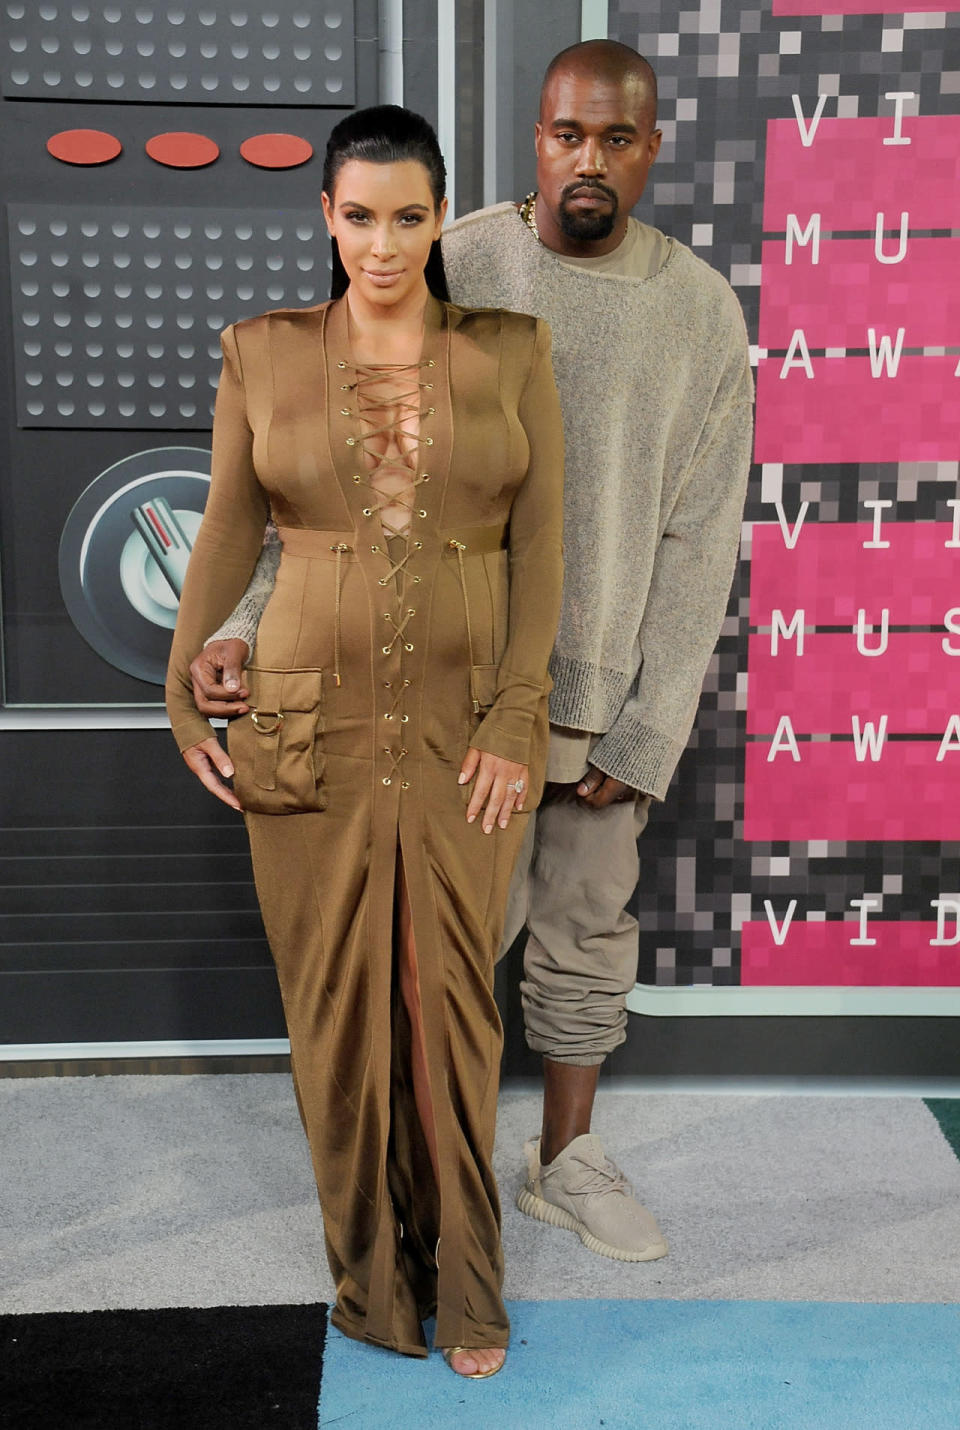 Hubby in tow, Kim Kardashian attended the VMAs in, yep you guessed it, another Balmain dress. The pregnant reality star showed off her curves in the lace-up frock and slicked back her long locks. [Photo: Getty]